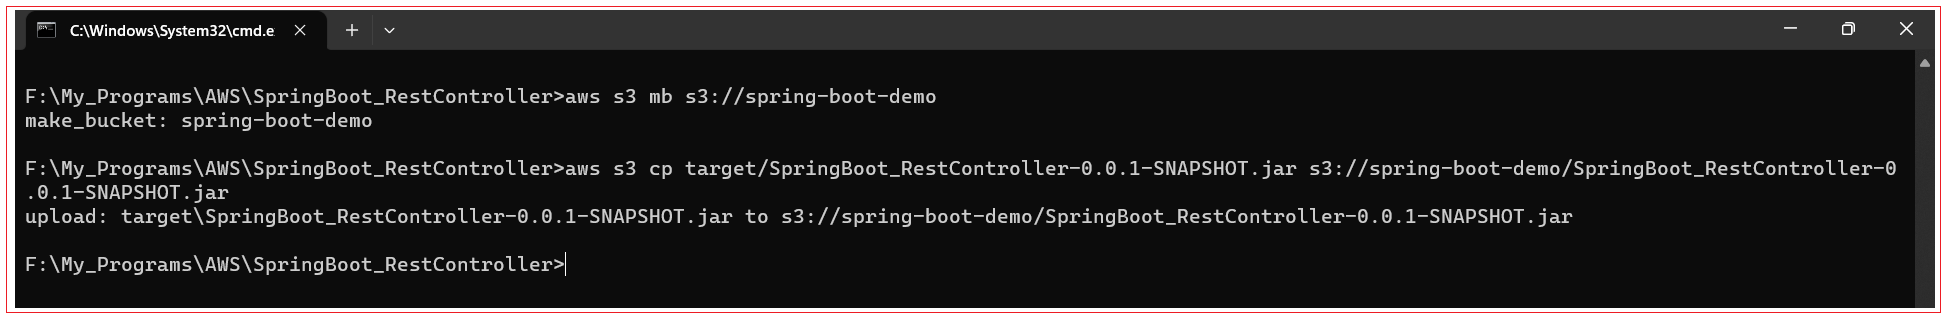 spring-boot-application-ebs-using-aws-cli-1